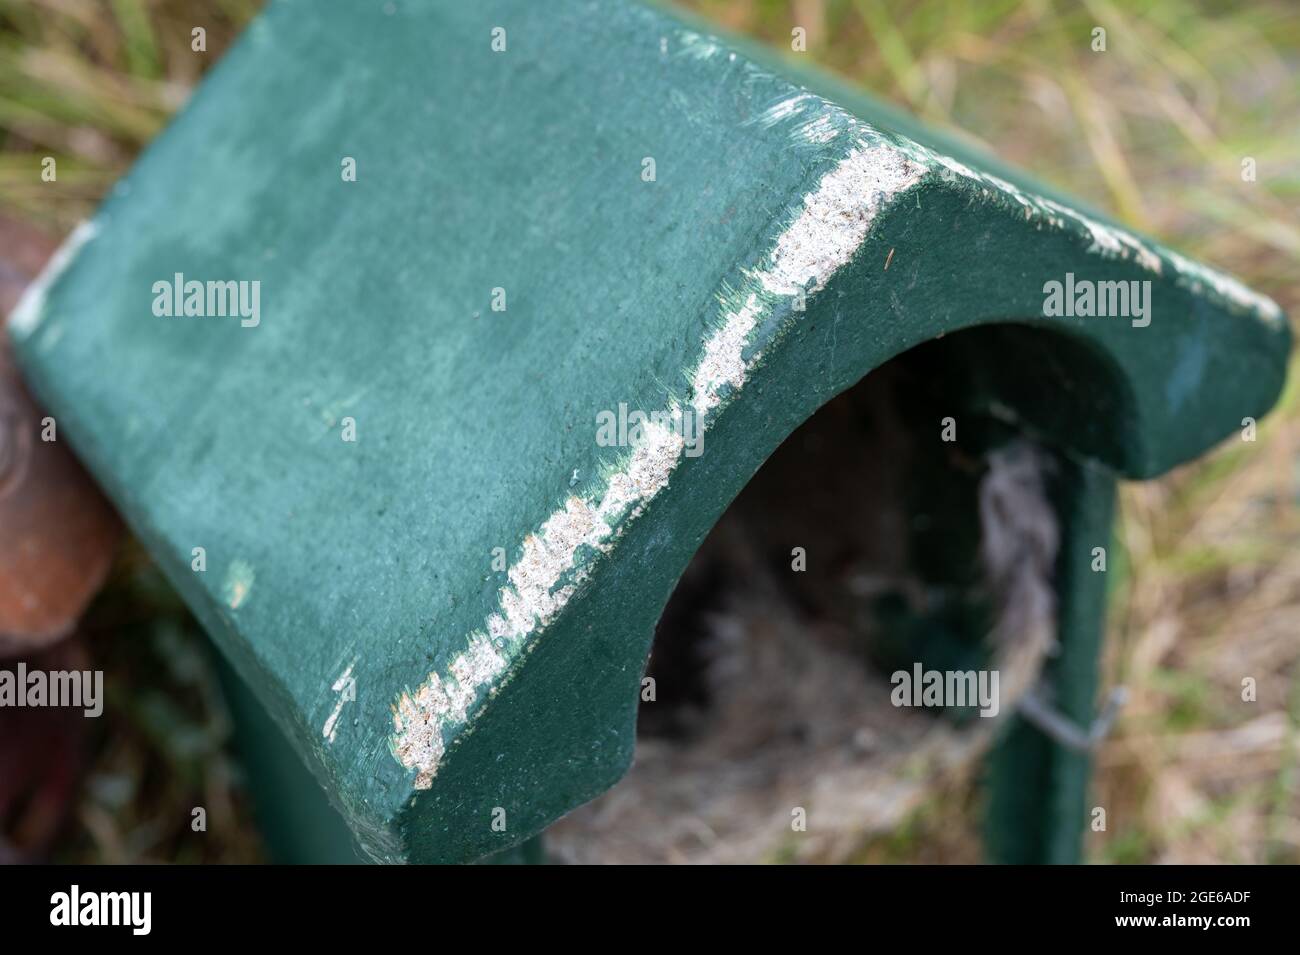 Damage to the top of a bird nest box caused by squirrels chewing on the roof. Stock Photo